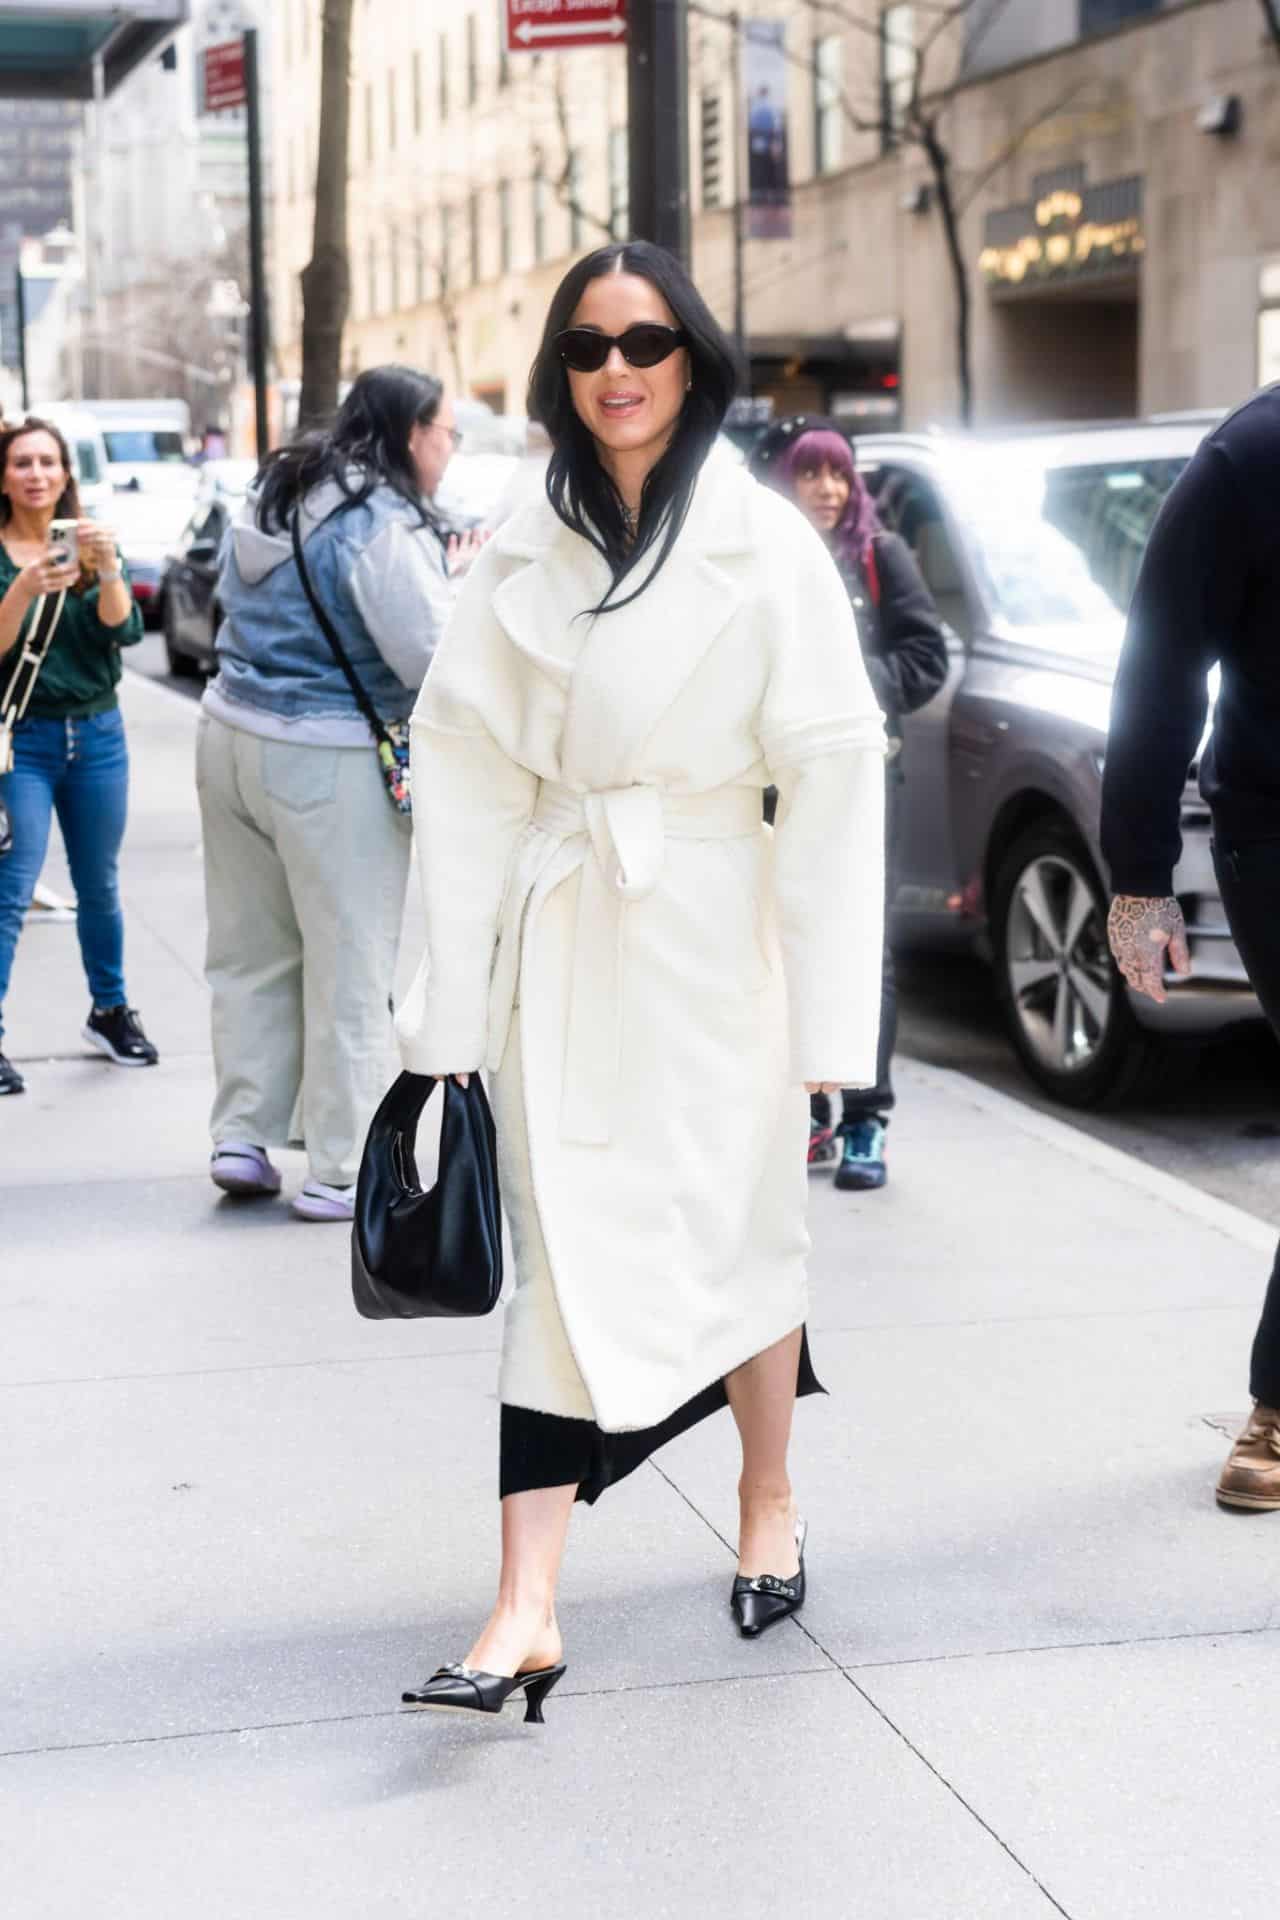 Katy Perry is Effortlessly Stylish in a White Wool Coat and Black Heels